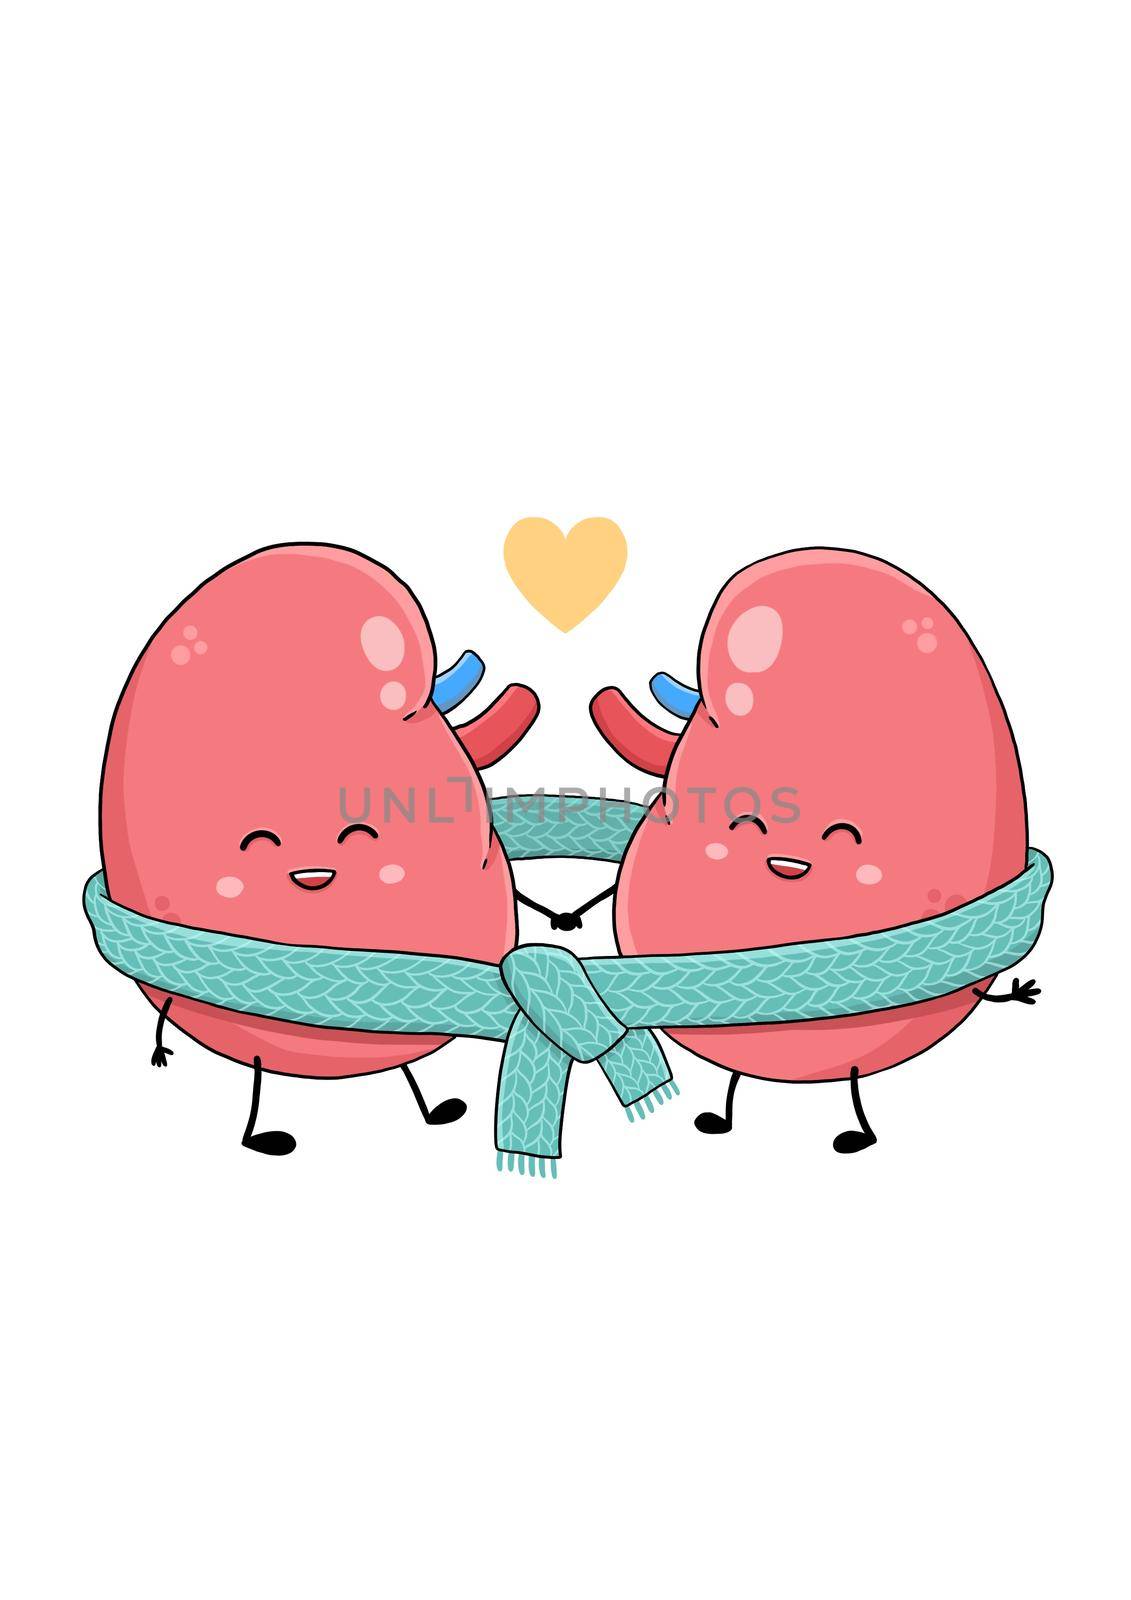 World kidney day, kidneys in knitted scarf. High quality illustration